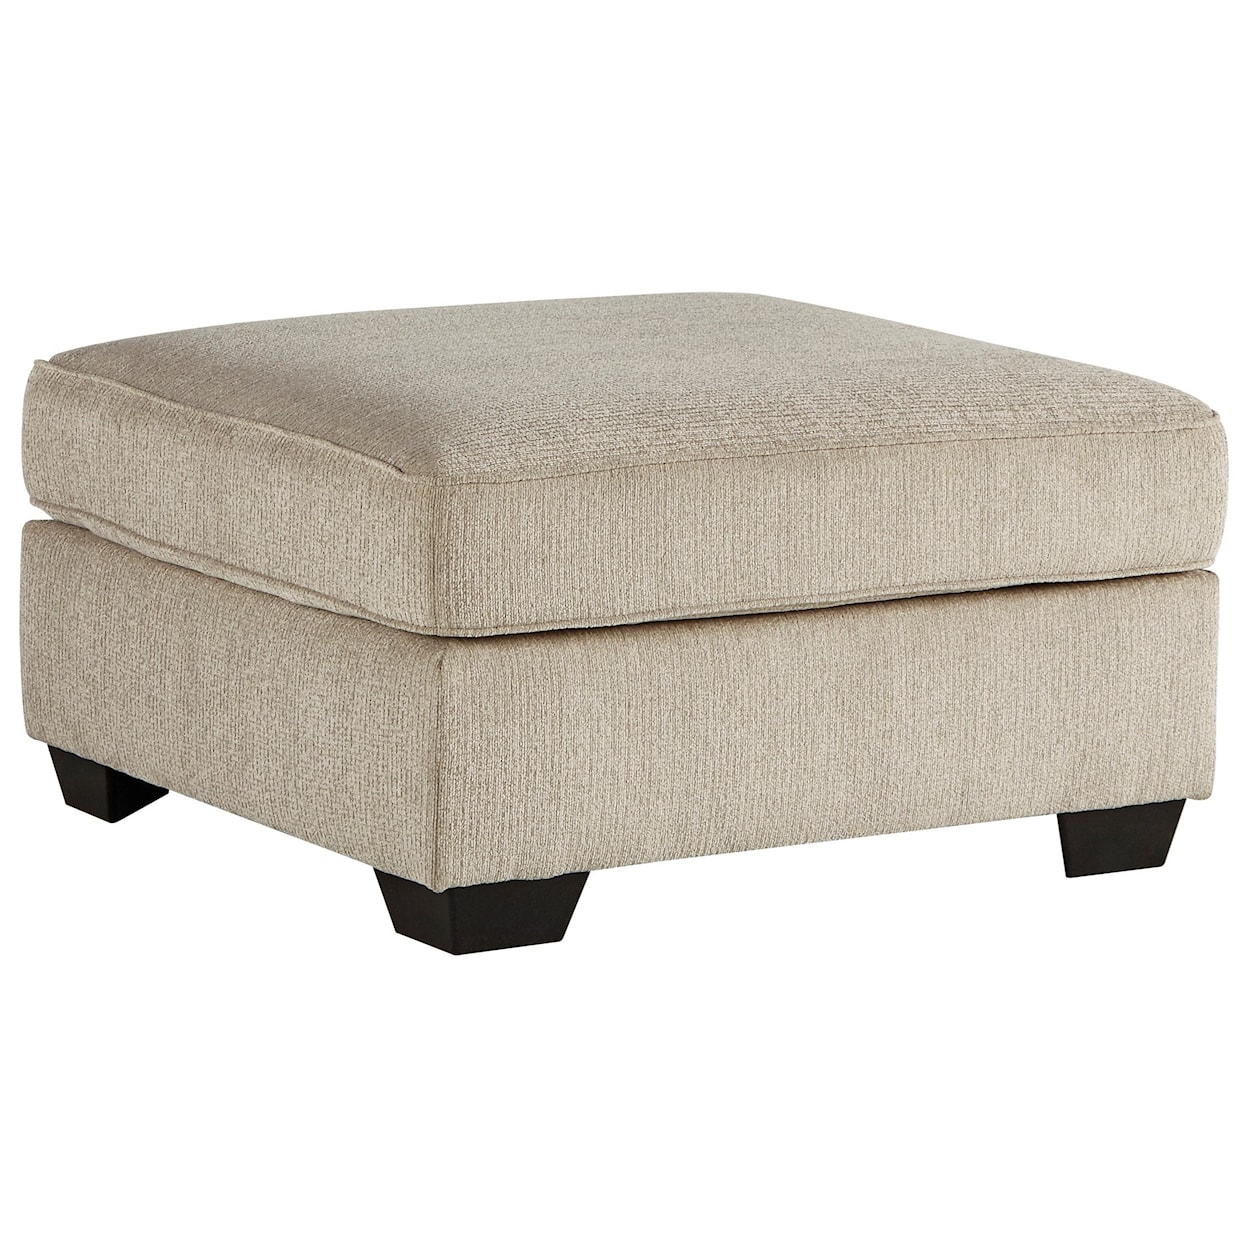 Signature Design by Ashley Decelle Oversized Accent Ottoman